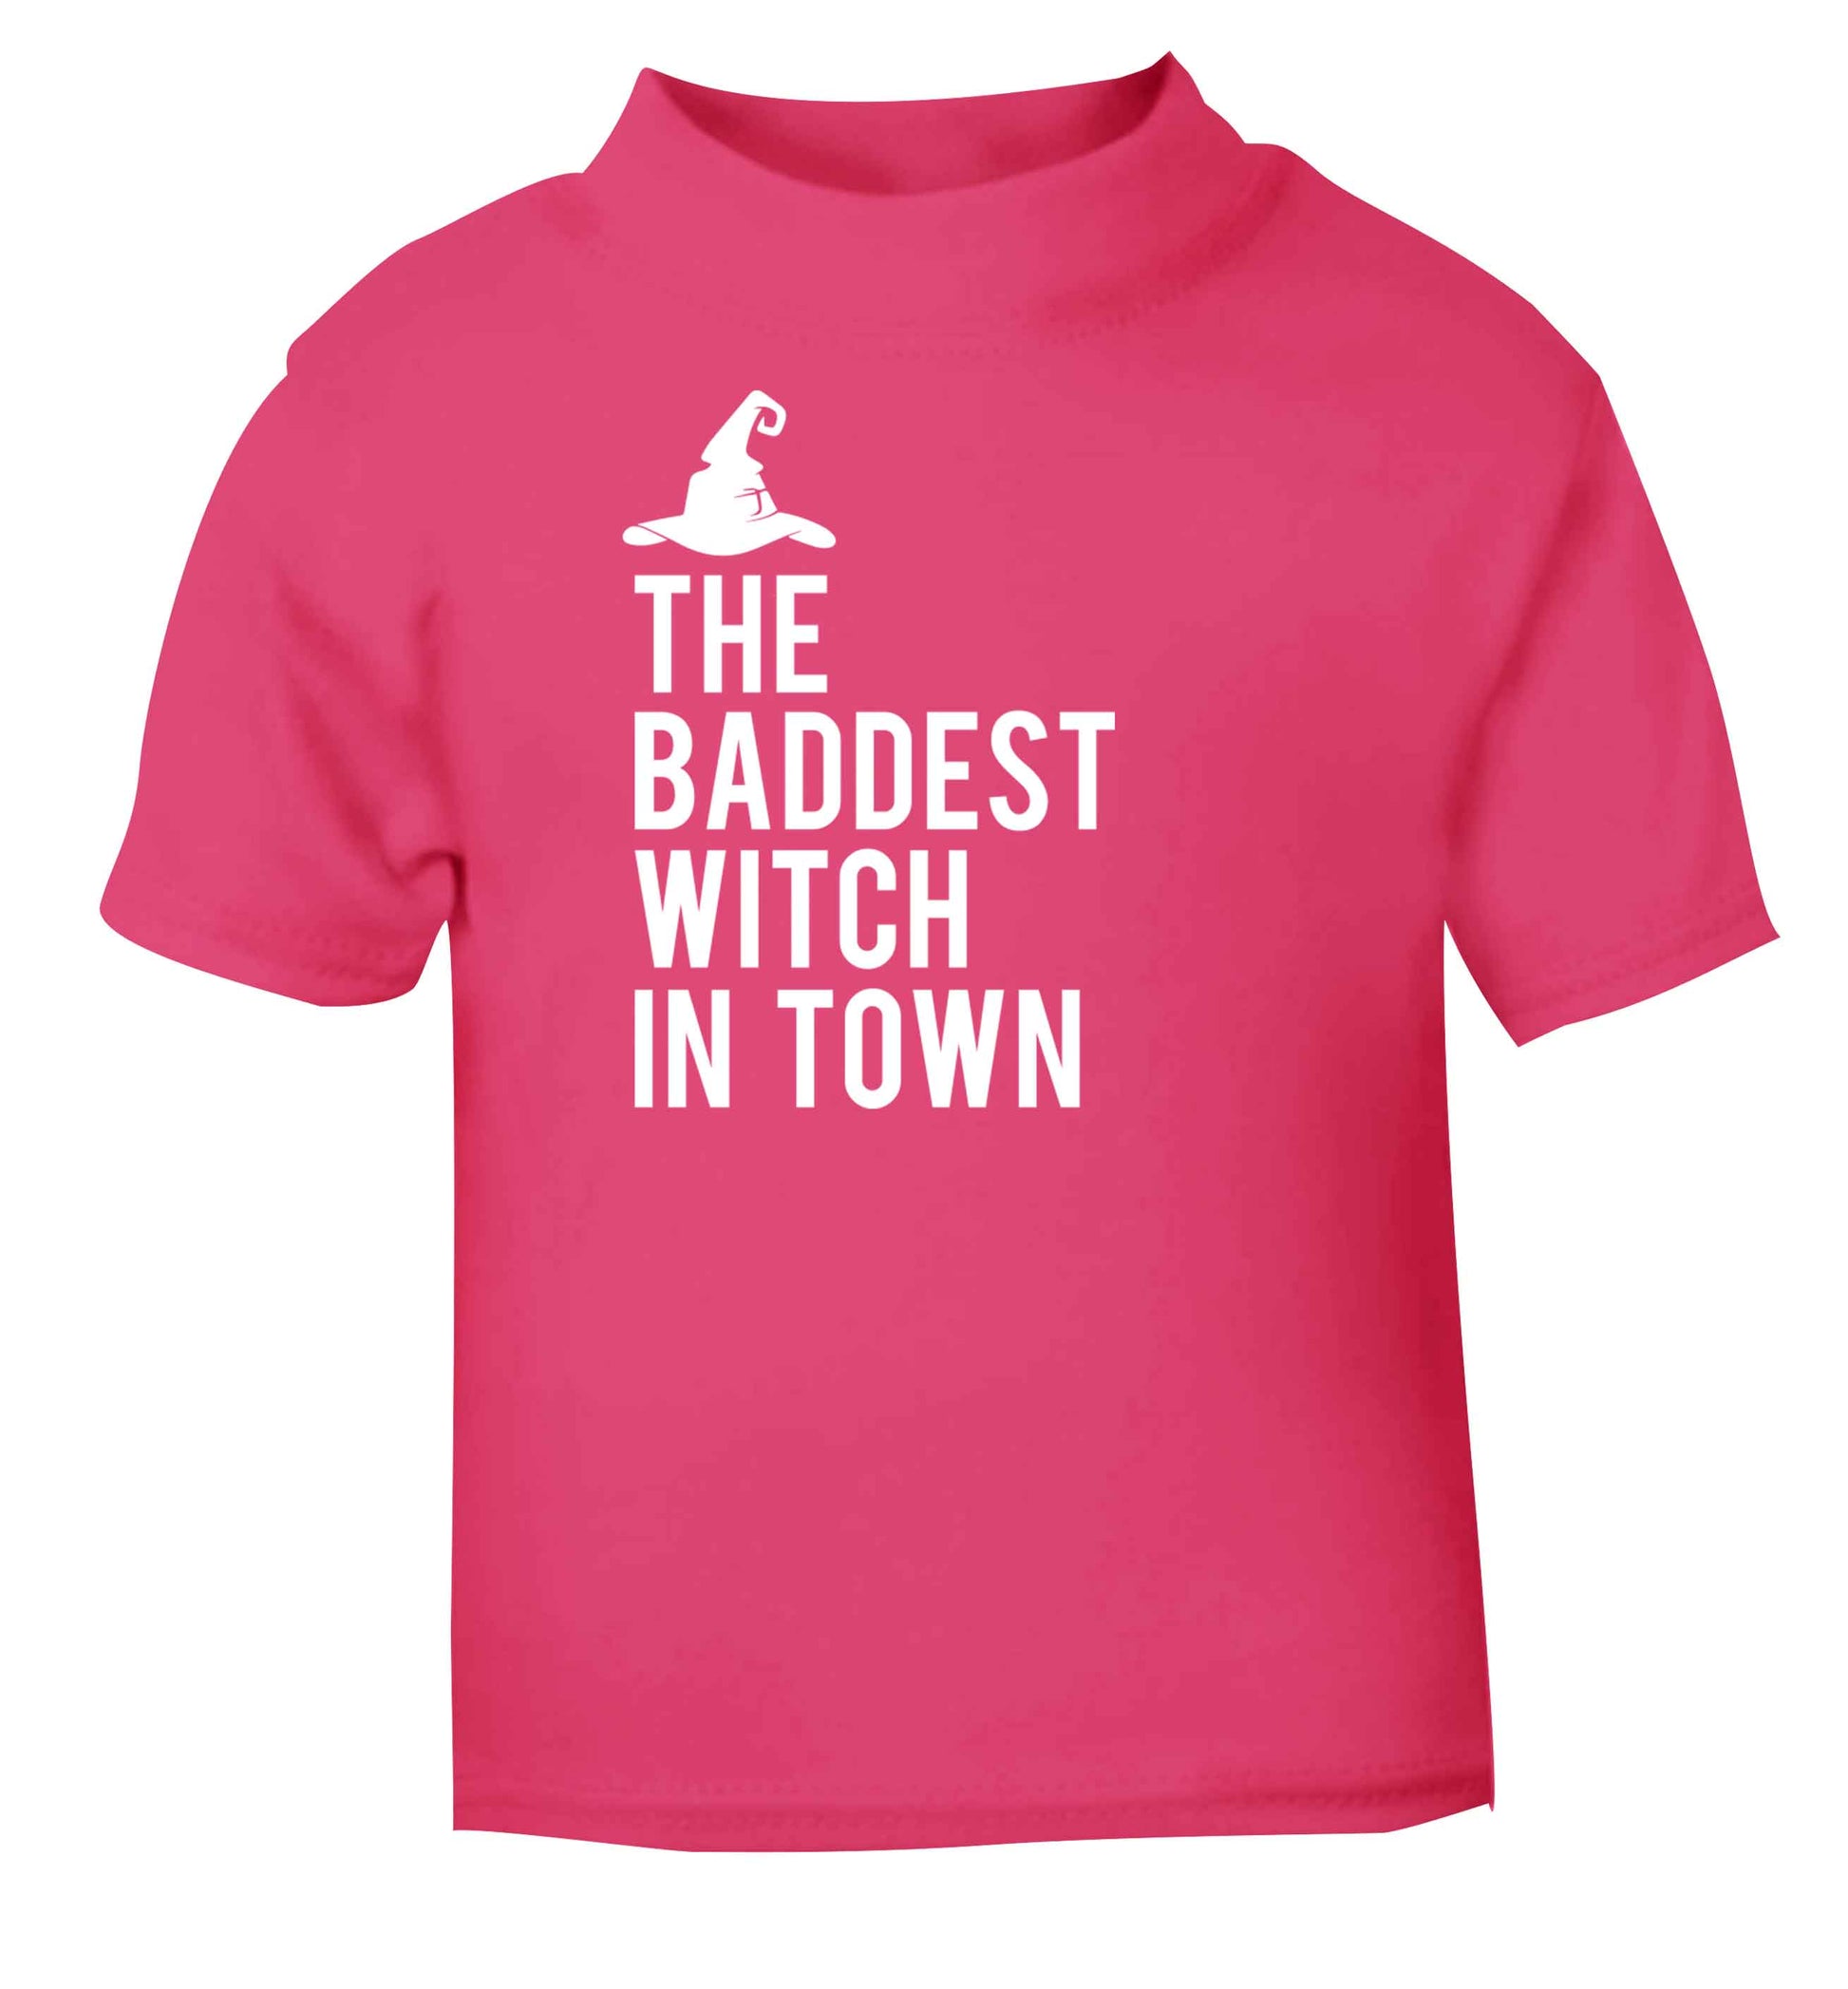 Badest witch in town pink baby toddler Tshirt 2 Years